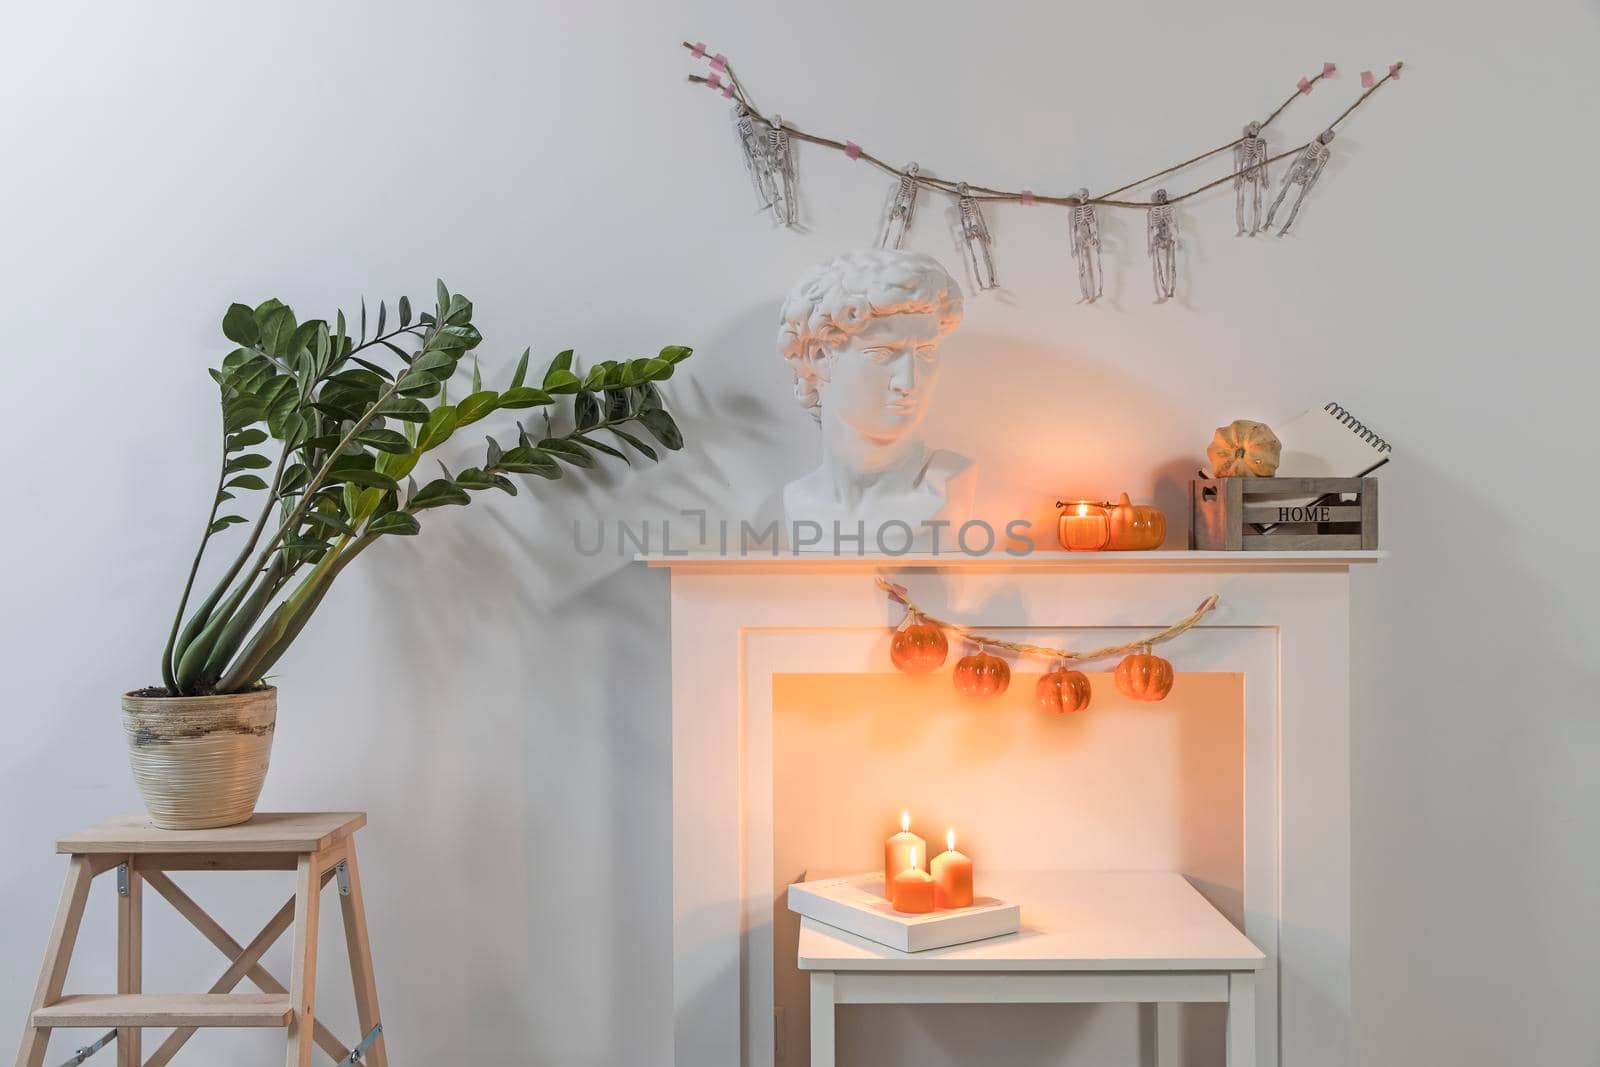 Apollo's plaster head. Zamioculcas plant in clay pot on stool. A garland of skeletons hangs on wall. A garland of plastic pumpkins hangs from fireplace. The interior is decorated for Halloween. by elenarostunova